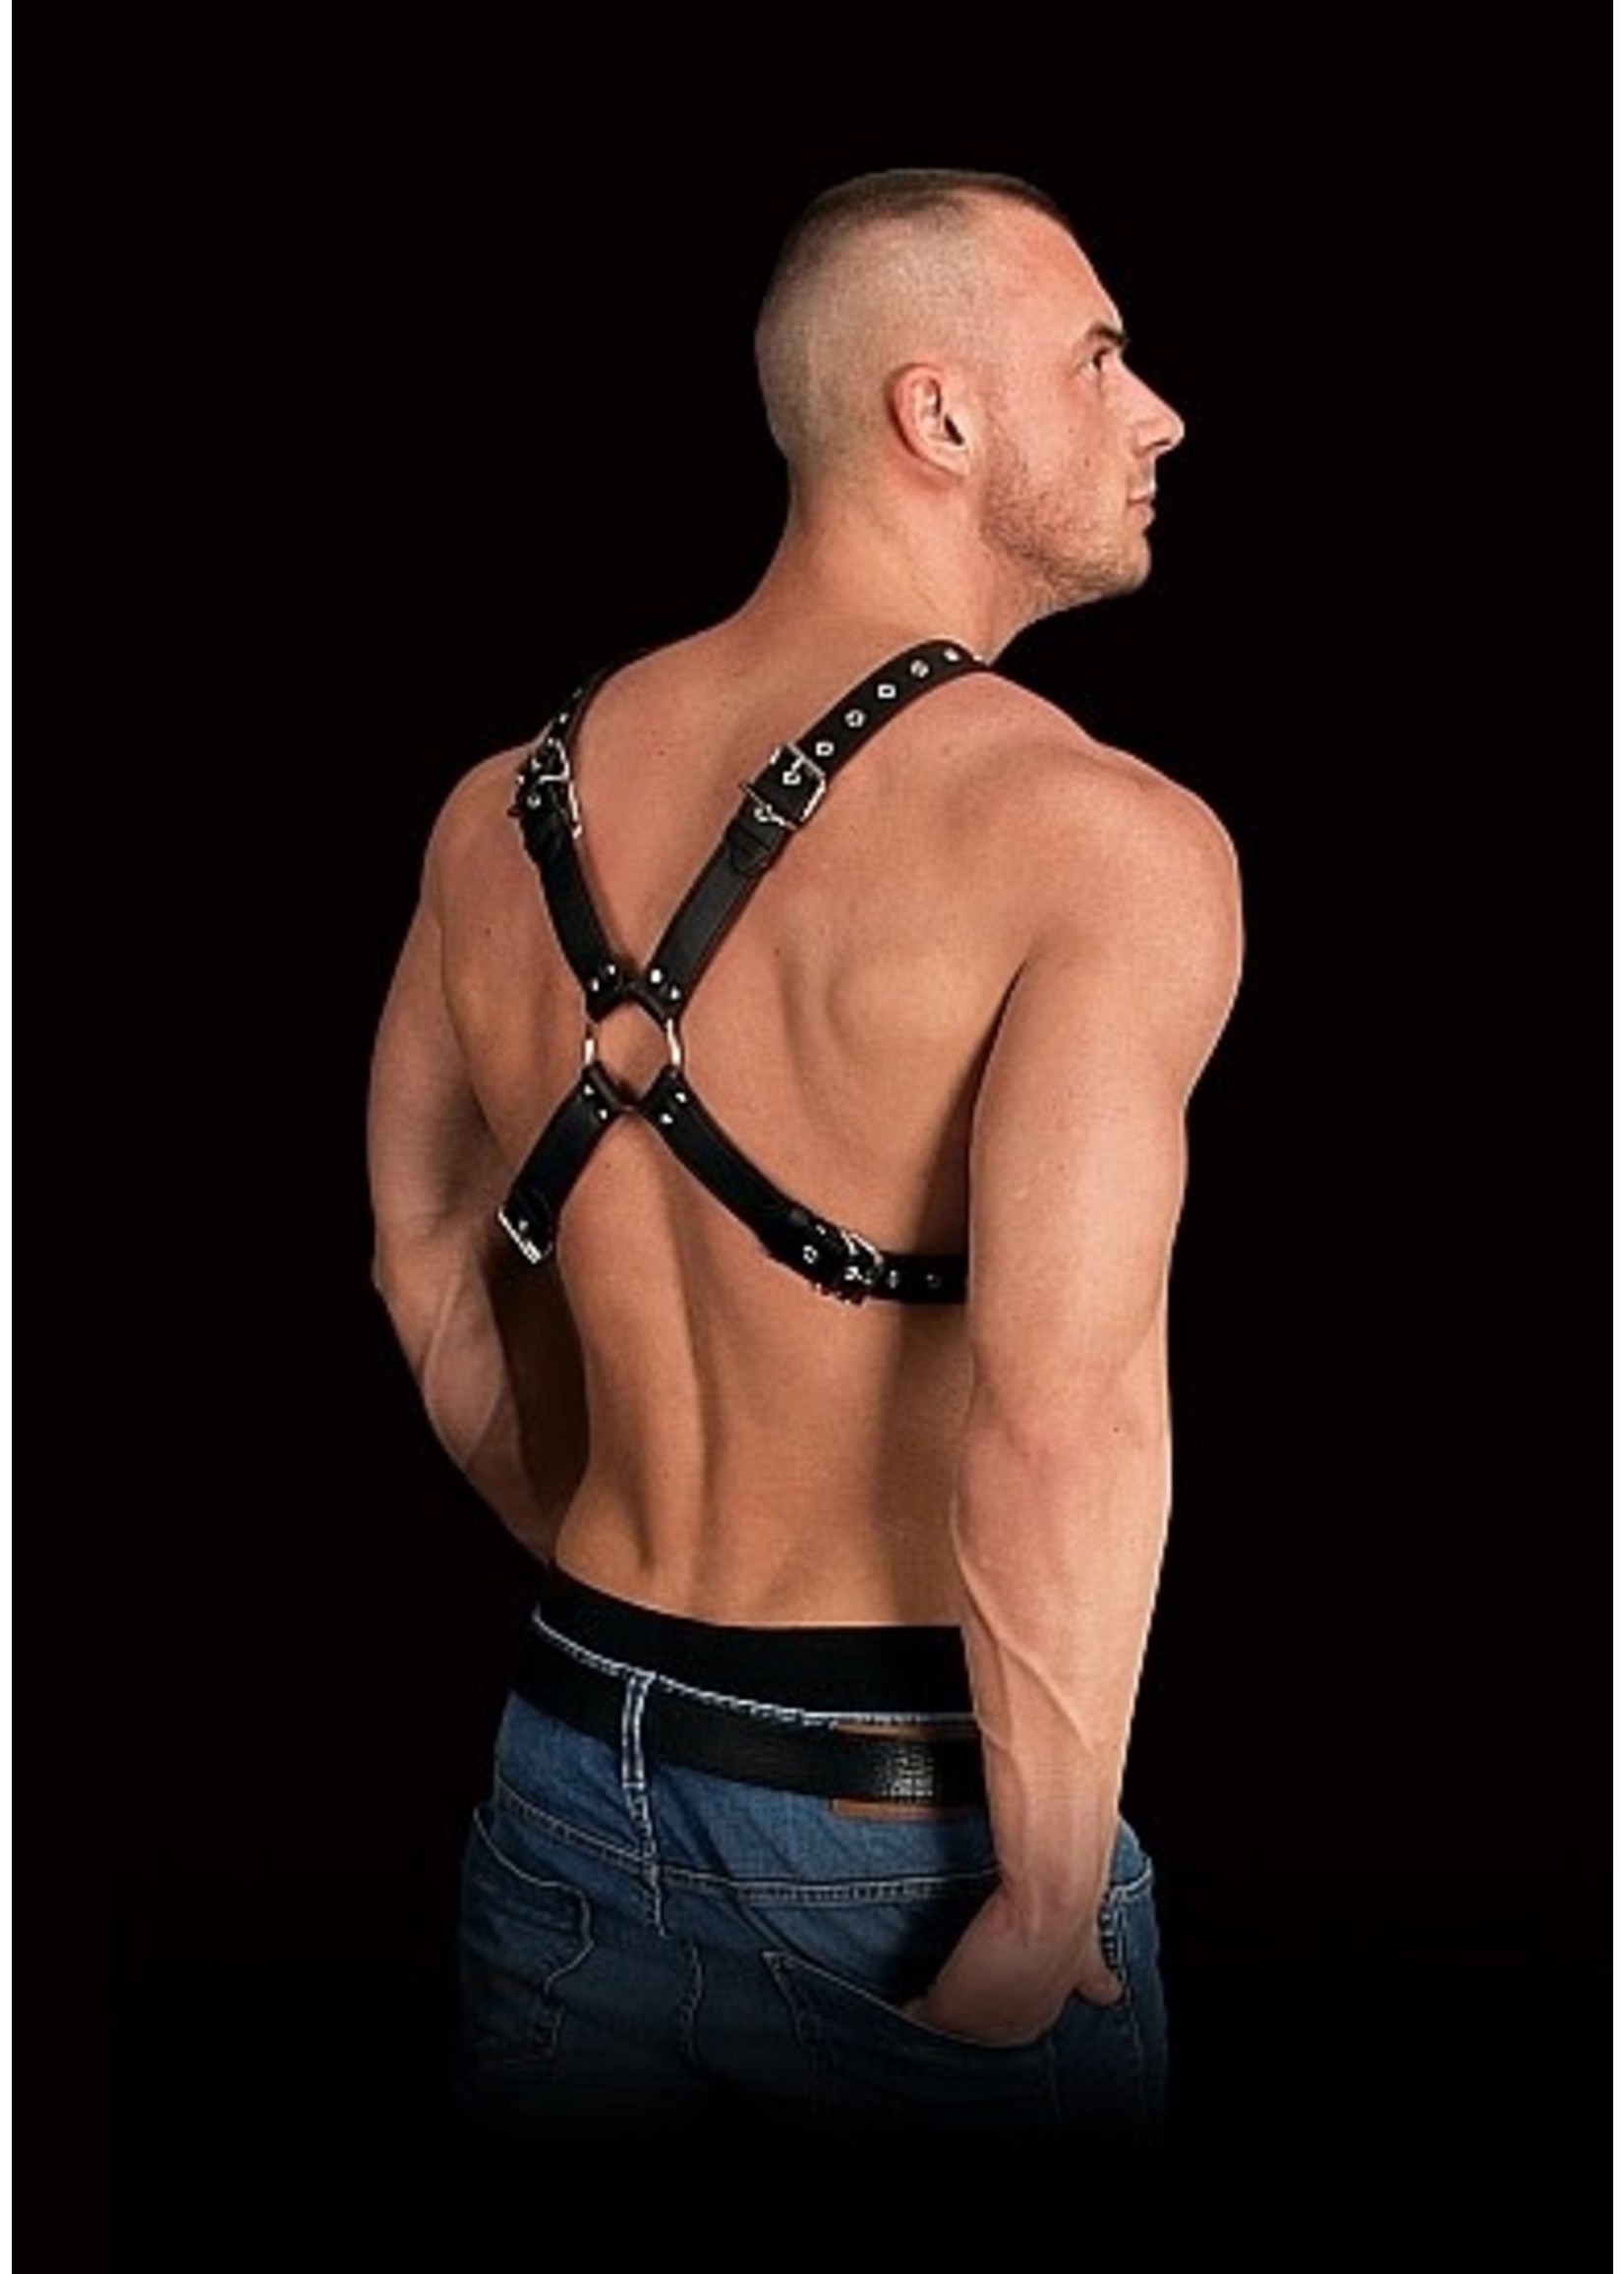 Ouch! Adonis high halter harness OneSize